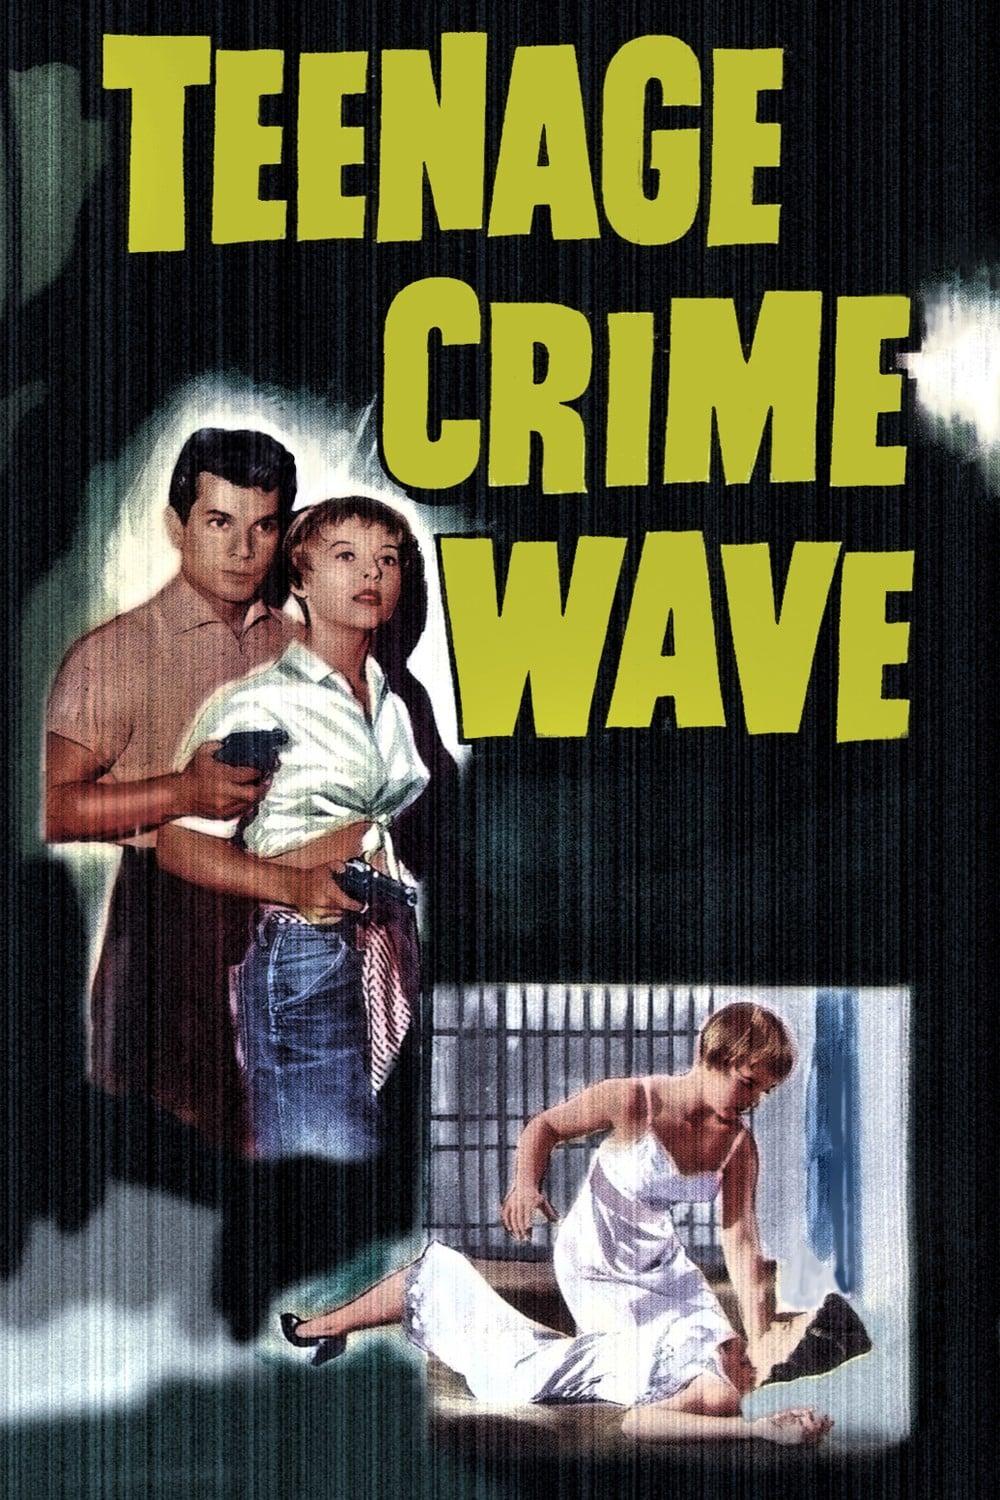 Teen-Age Crime Wave poster